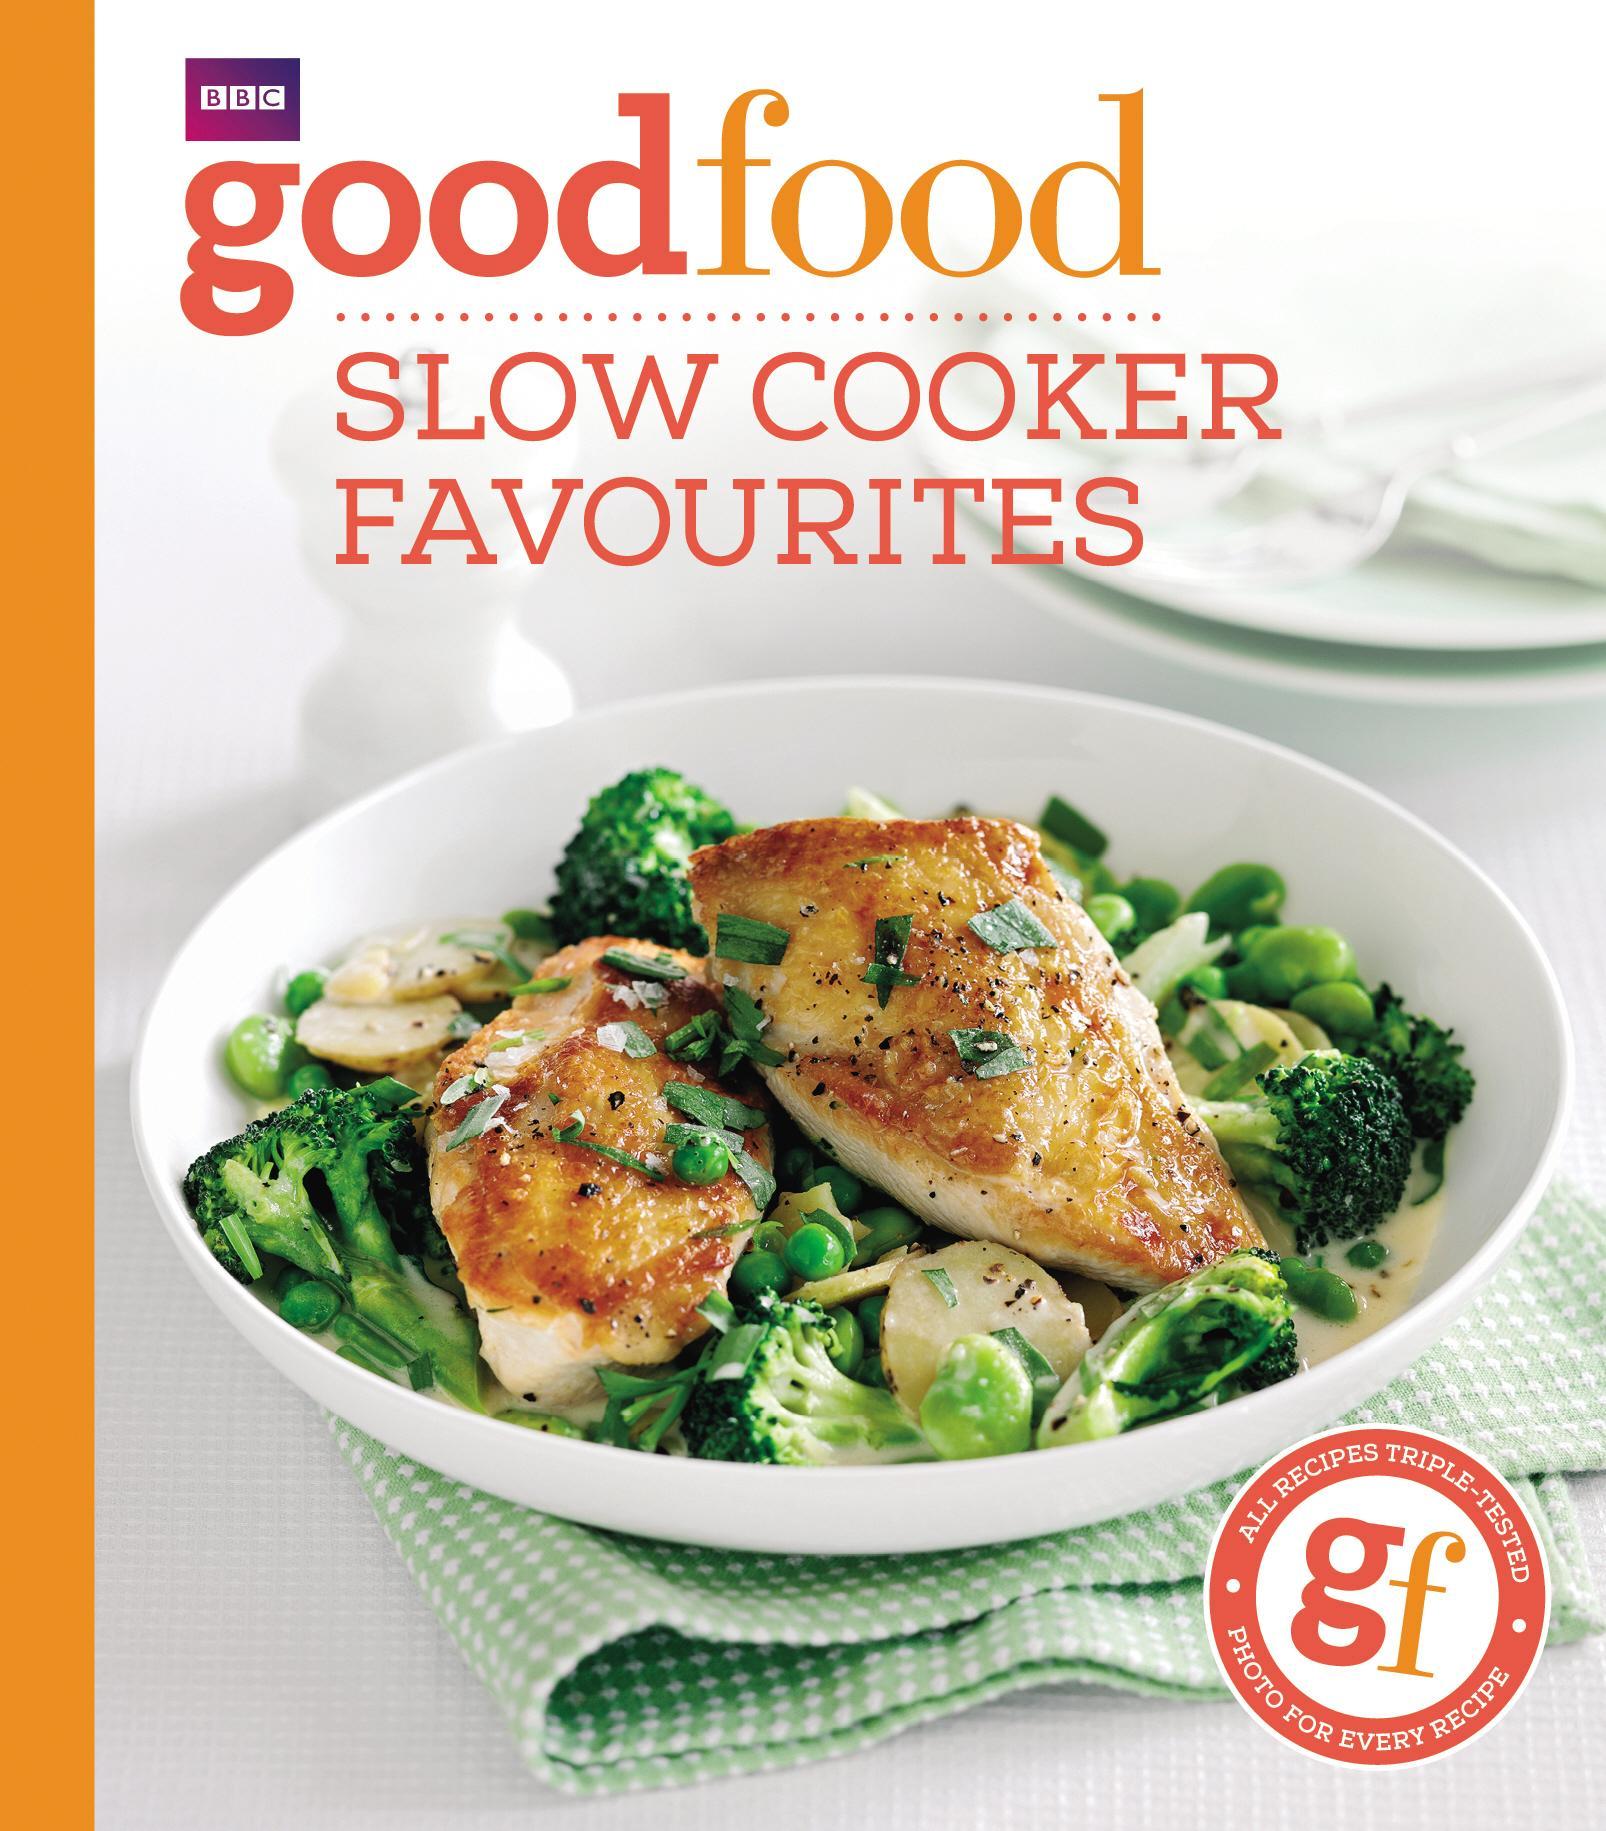 Good Food: Slow cooker favourites -  